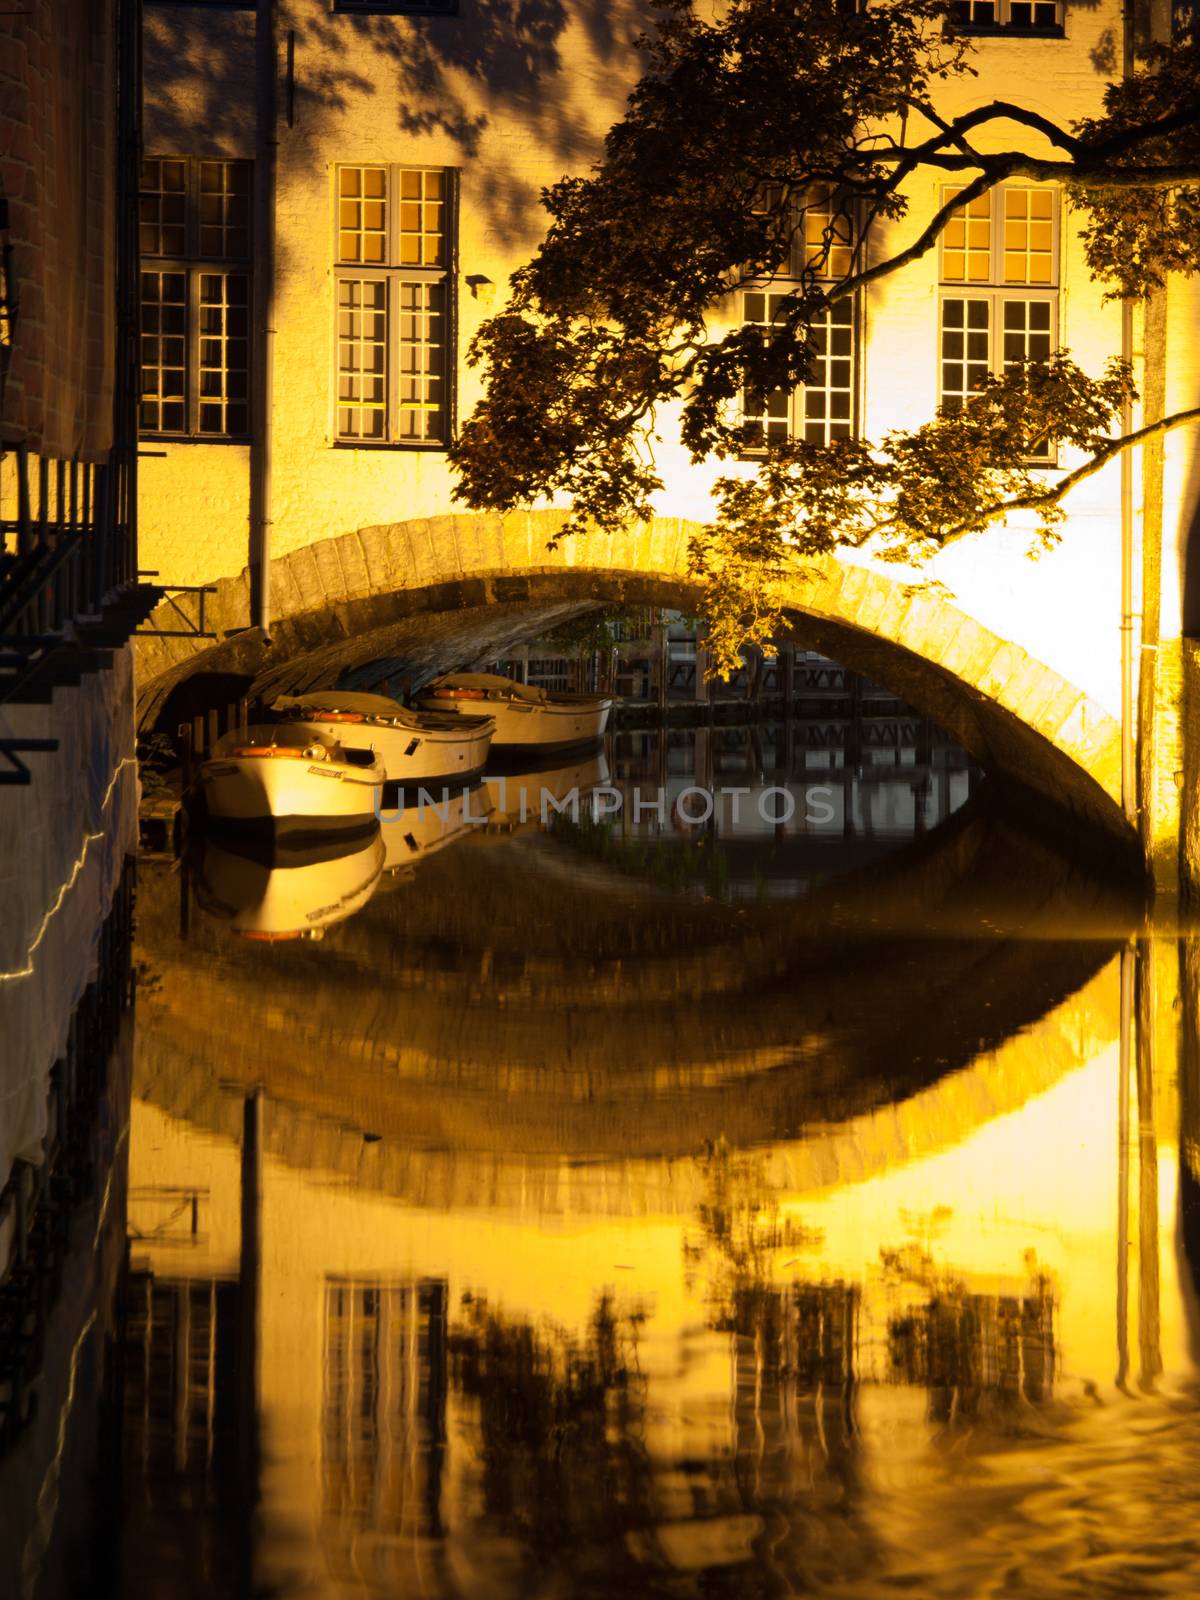 Boat reflection on water canal by night in Bruges, Belgium.